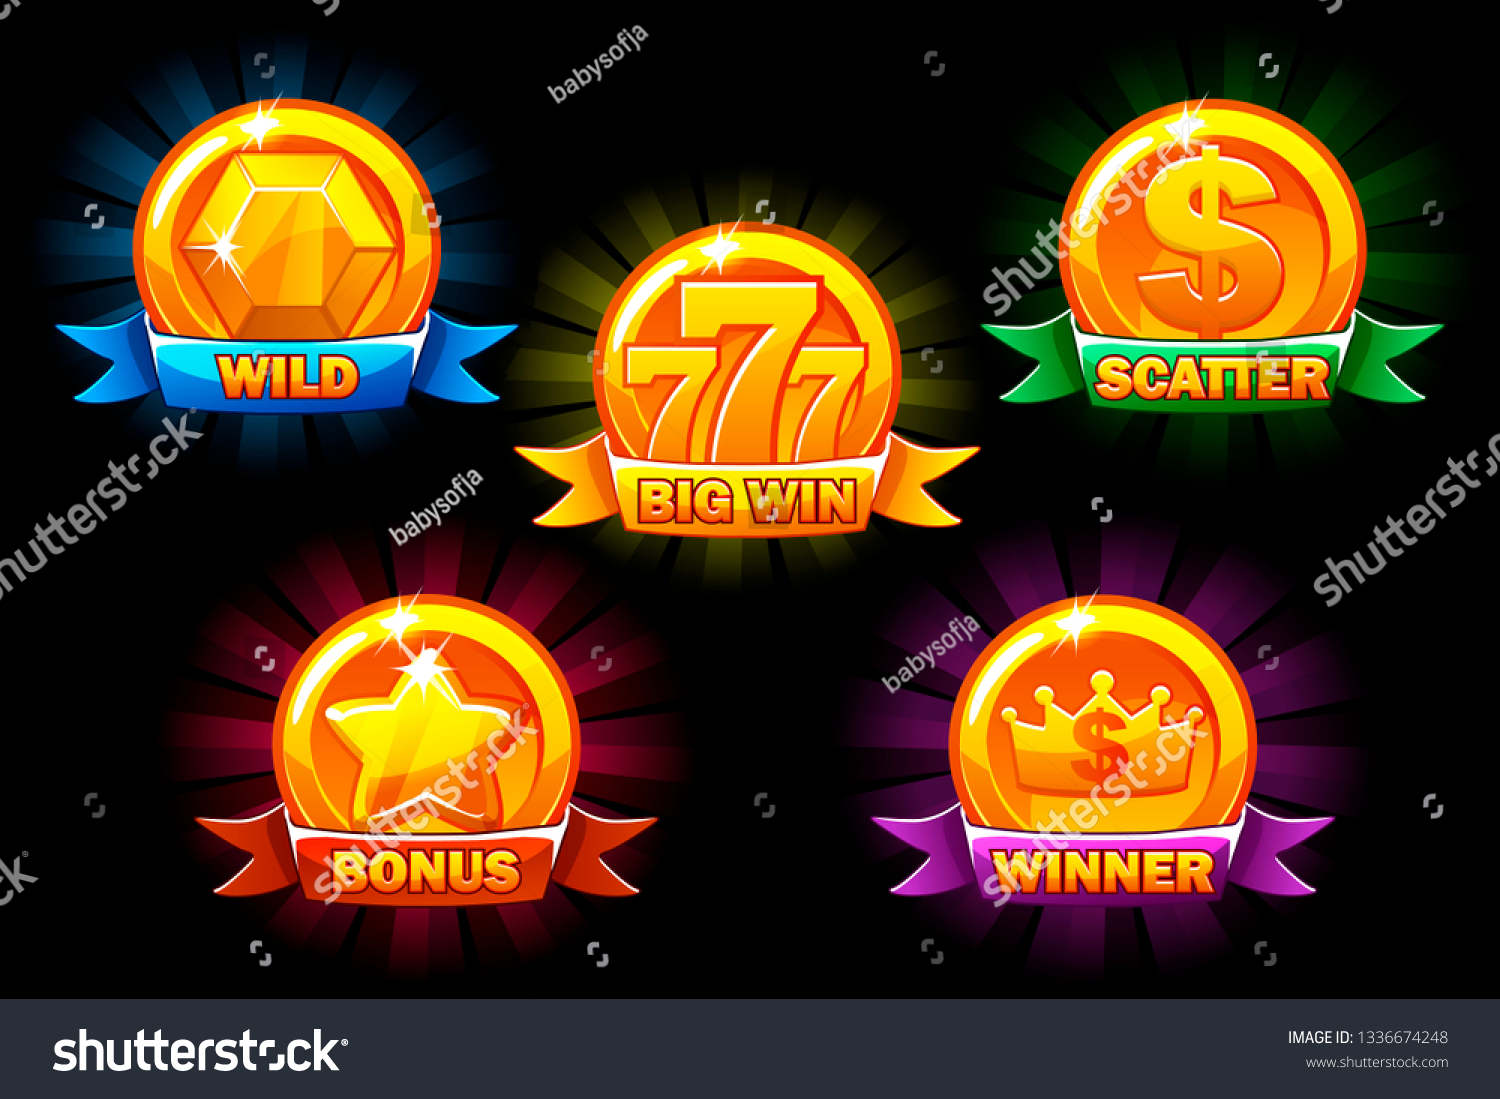 SVG of Slots icons, collections wild, bonus, scatter and winner symbols. For game, slots, game development. svg